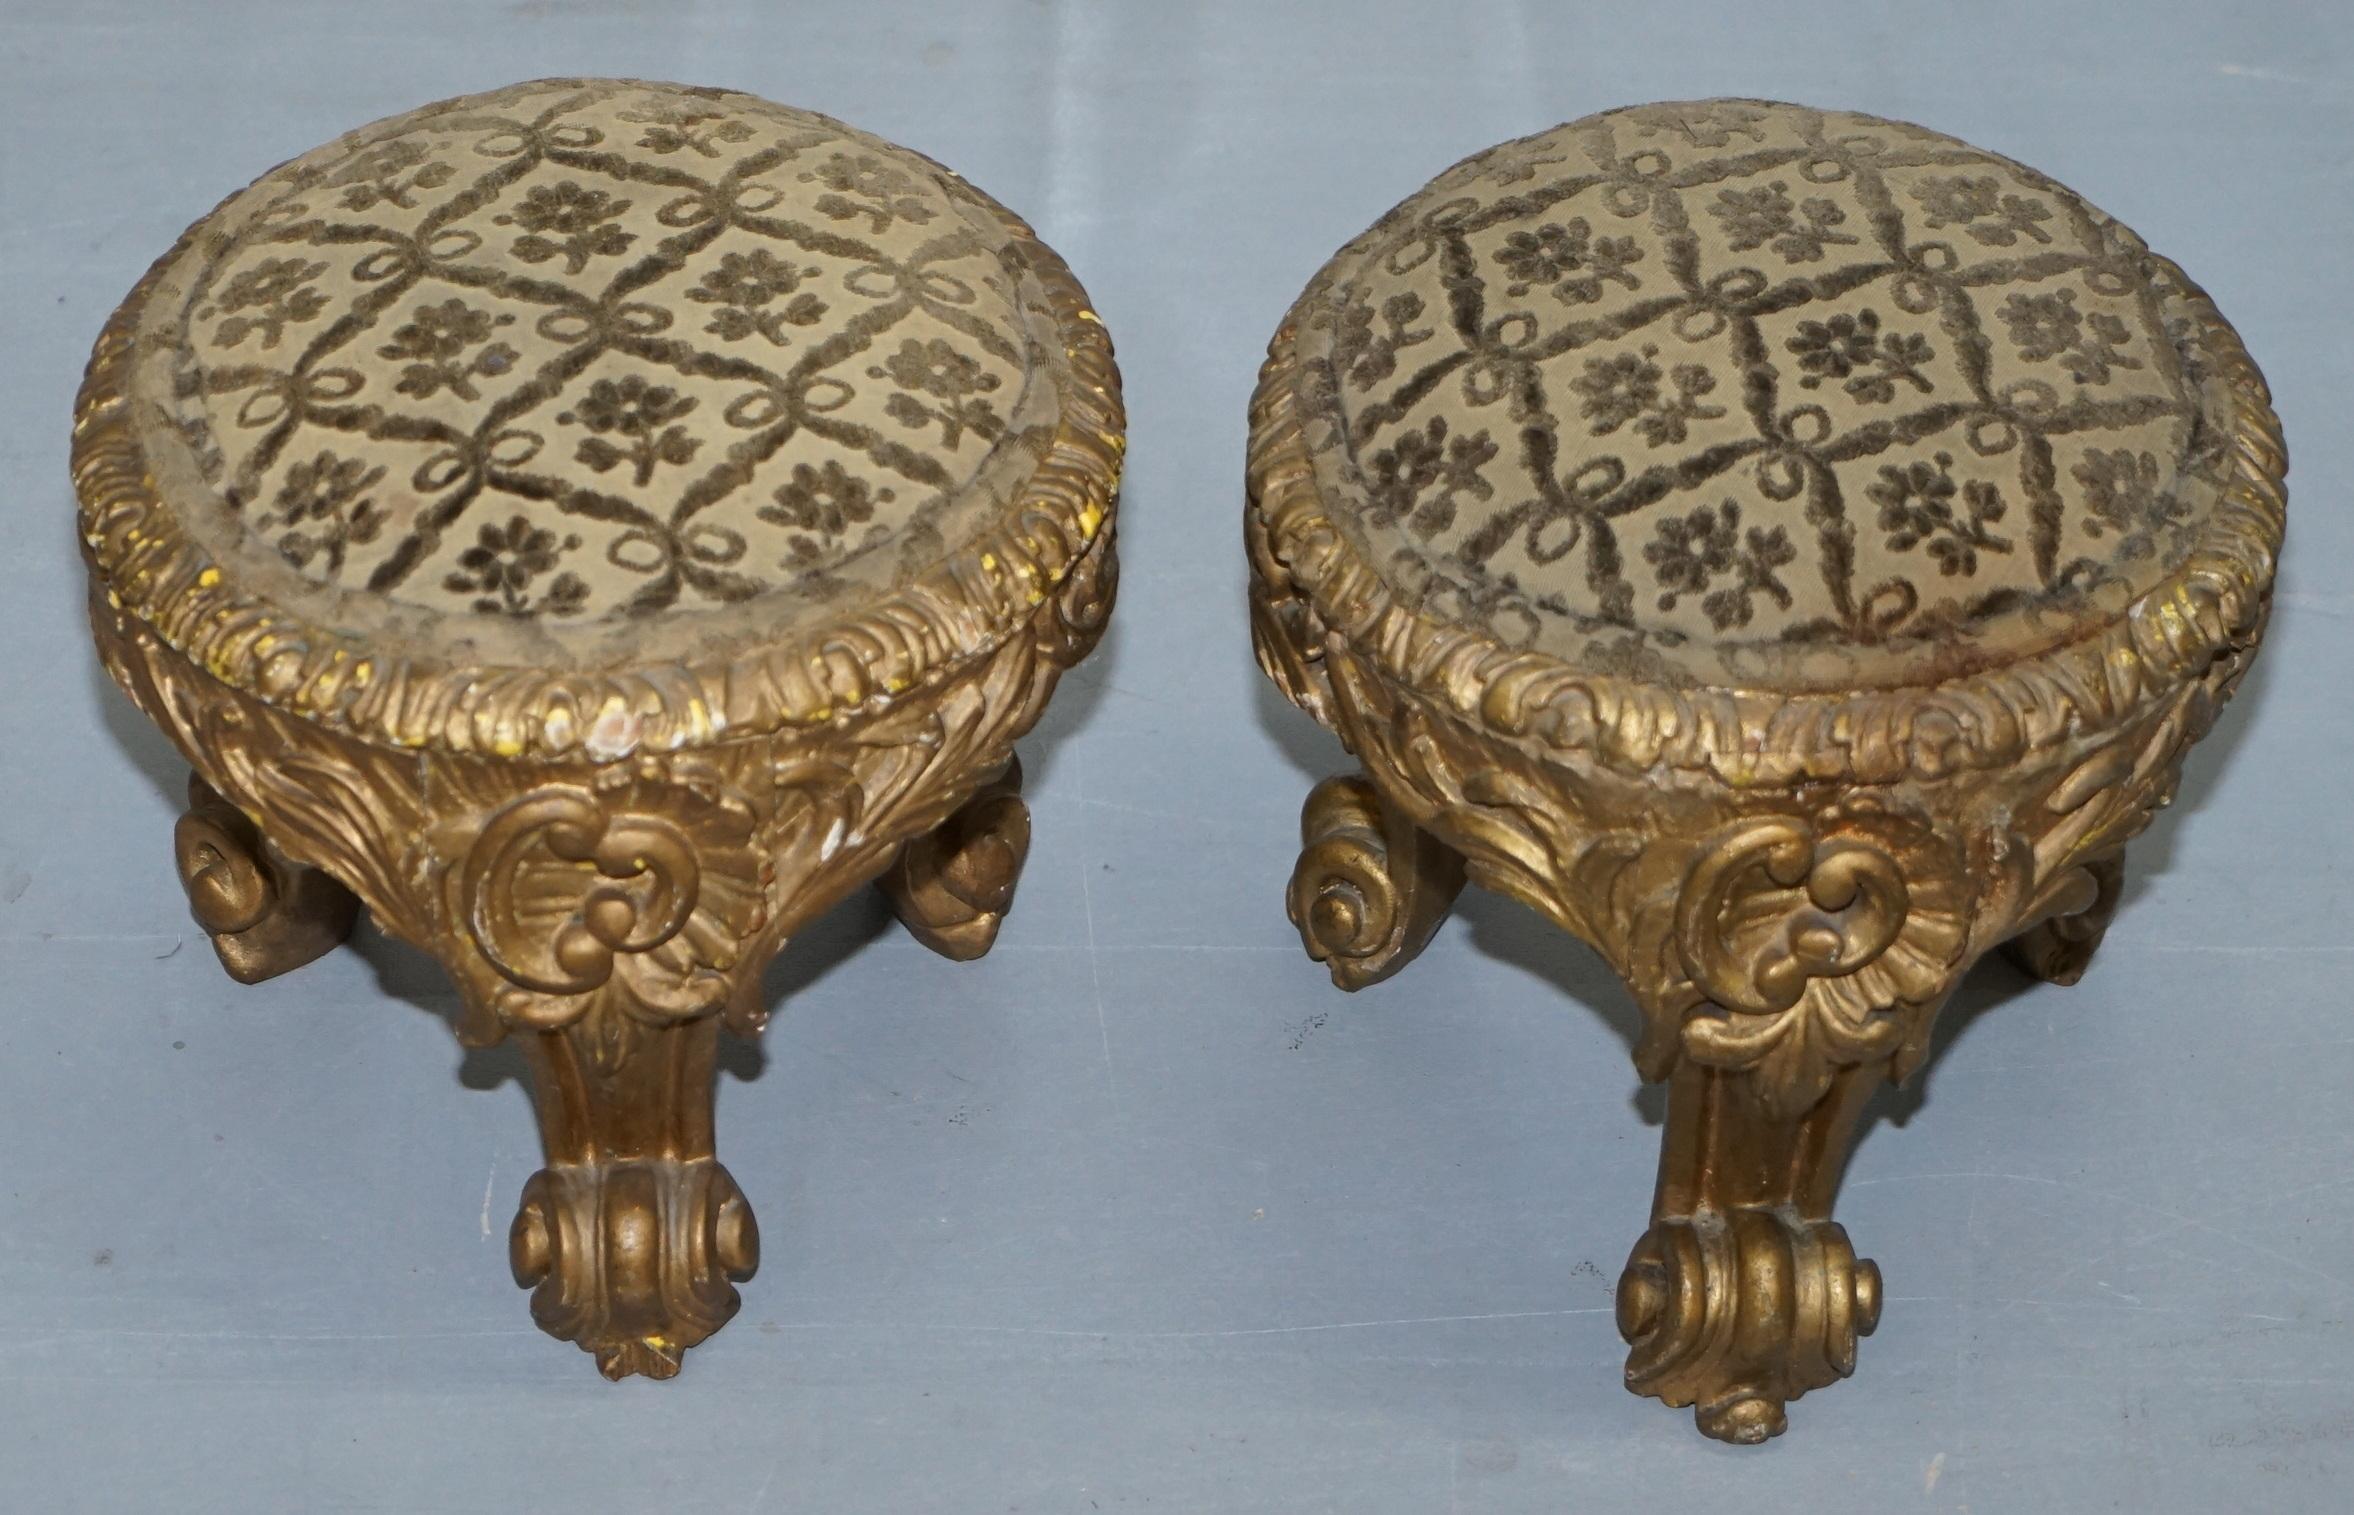 We are delighted to offer for sale this pair of original early 19th-century Italian giltwood stools 

These stools are over 200 years old and look sublime from every angle, the muddy gold giltwood is exactly as you would expect colour wise from